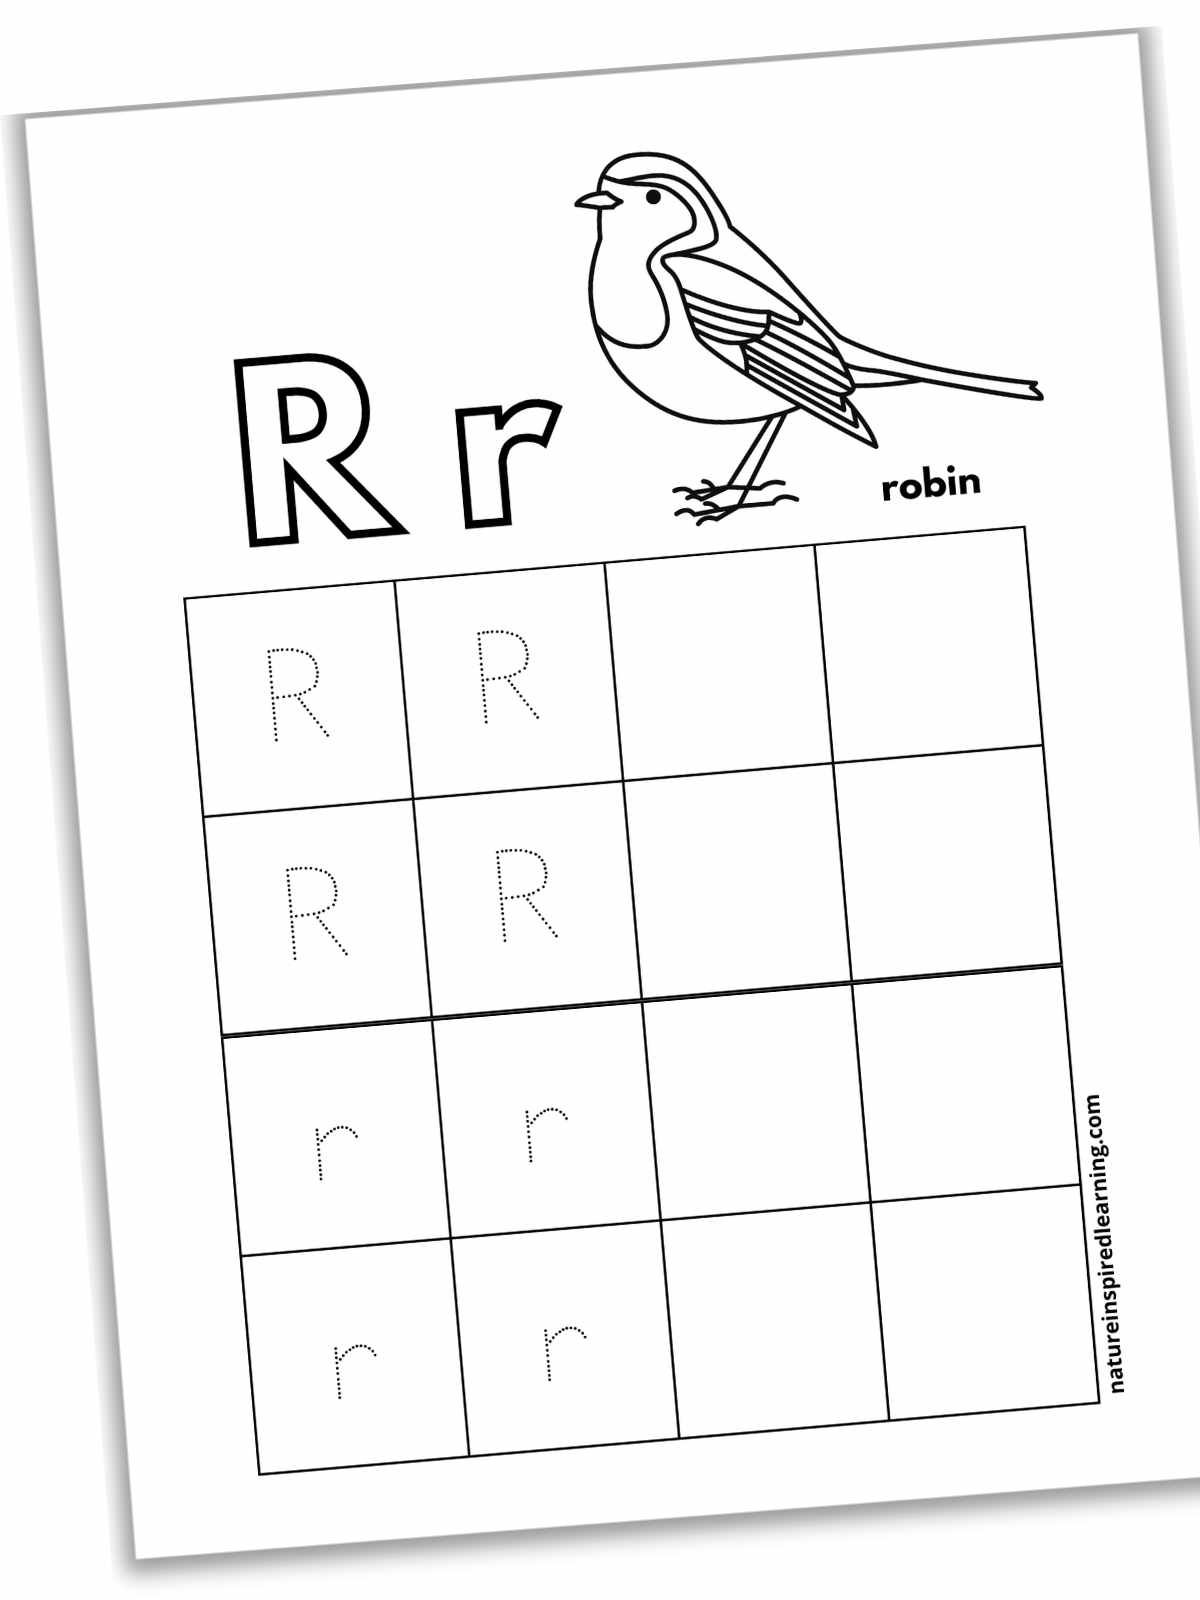 Worksheet with a square grids and dotted letters next to blank squares. Outline of R r next to a black and white robin at top.